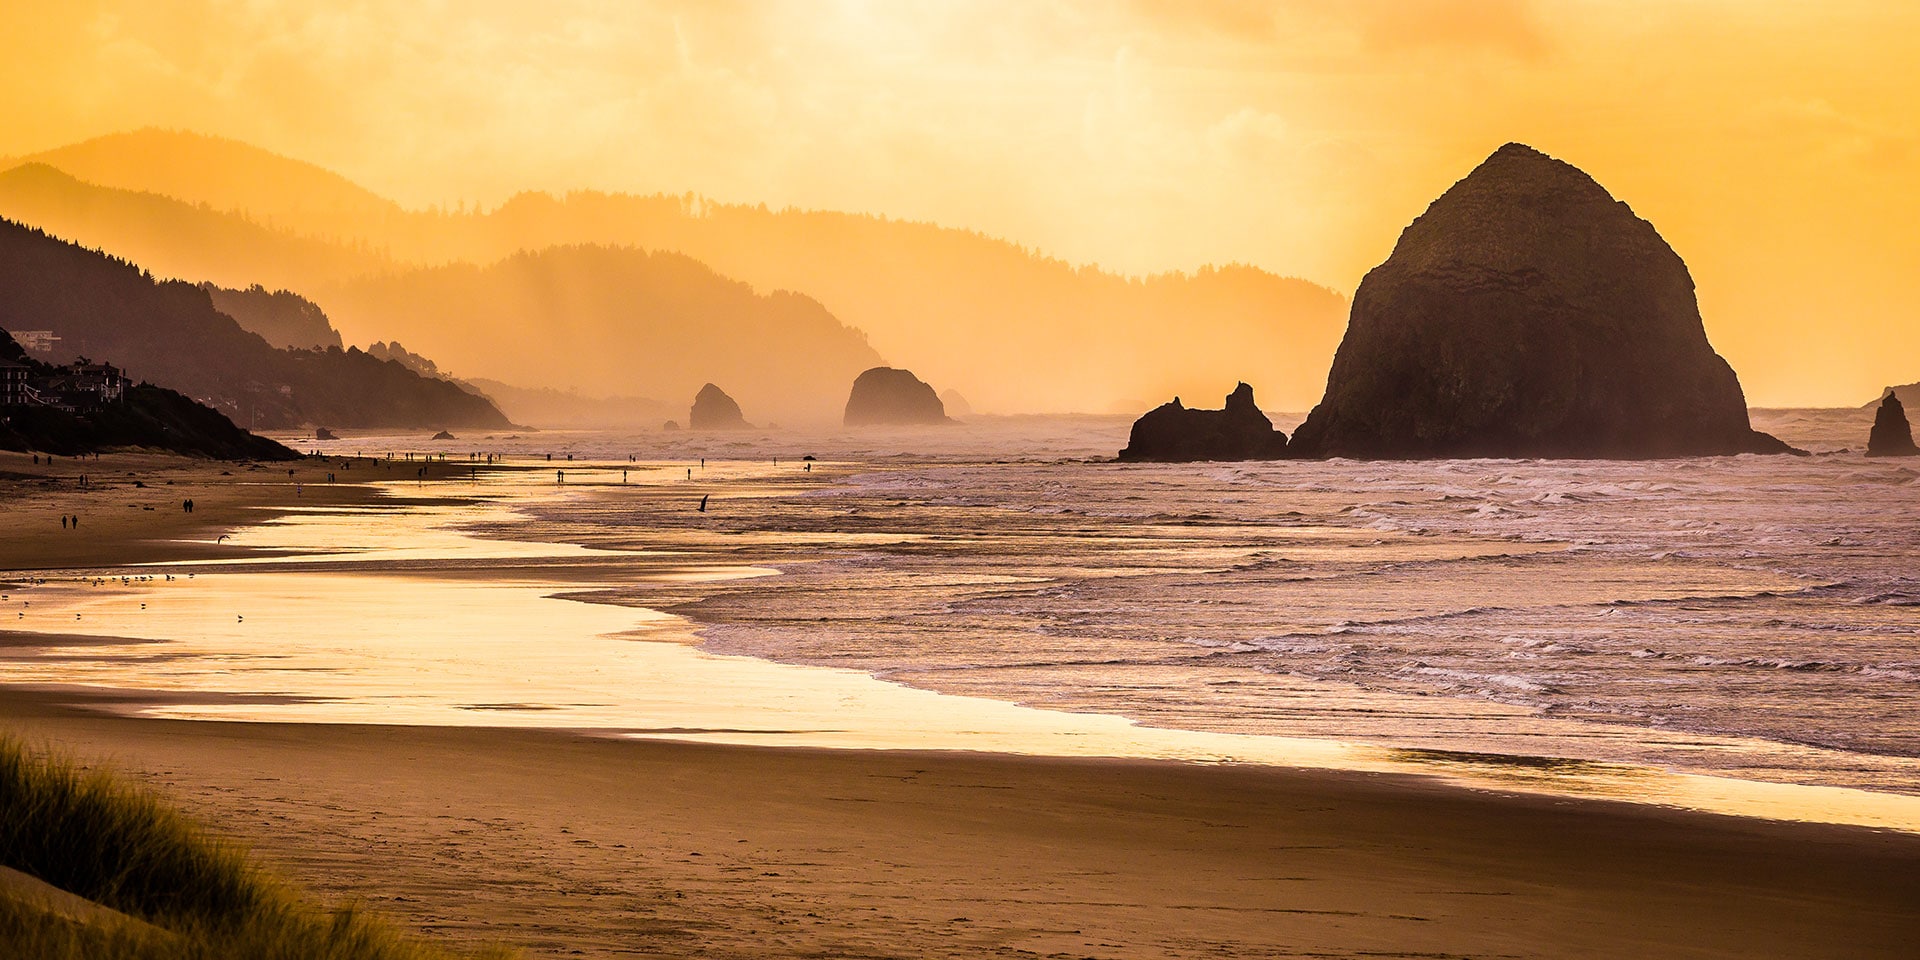 Beaching it on a Budget? Here Are 10 Affordable U.S. Vacation Spots